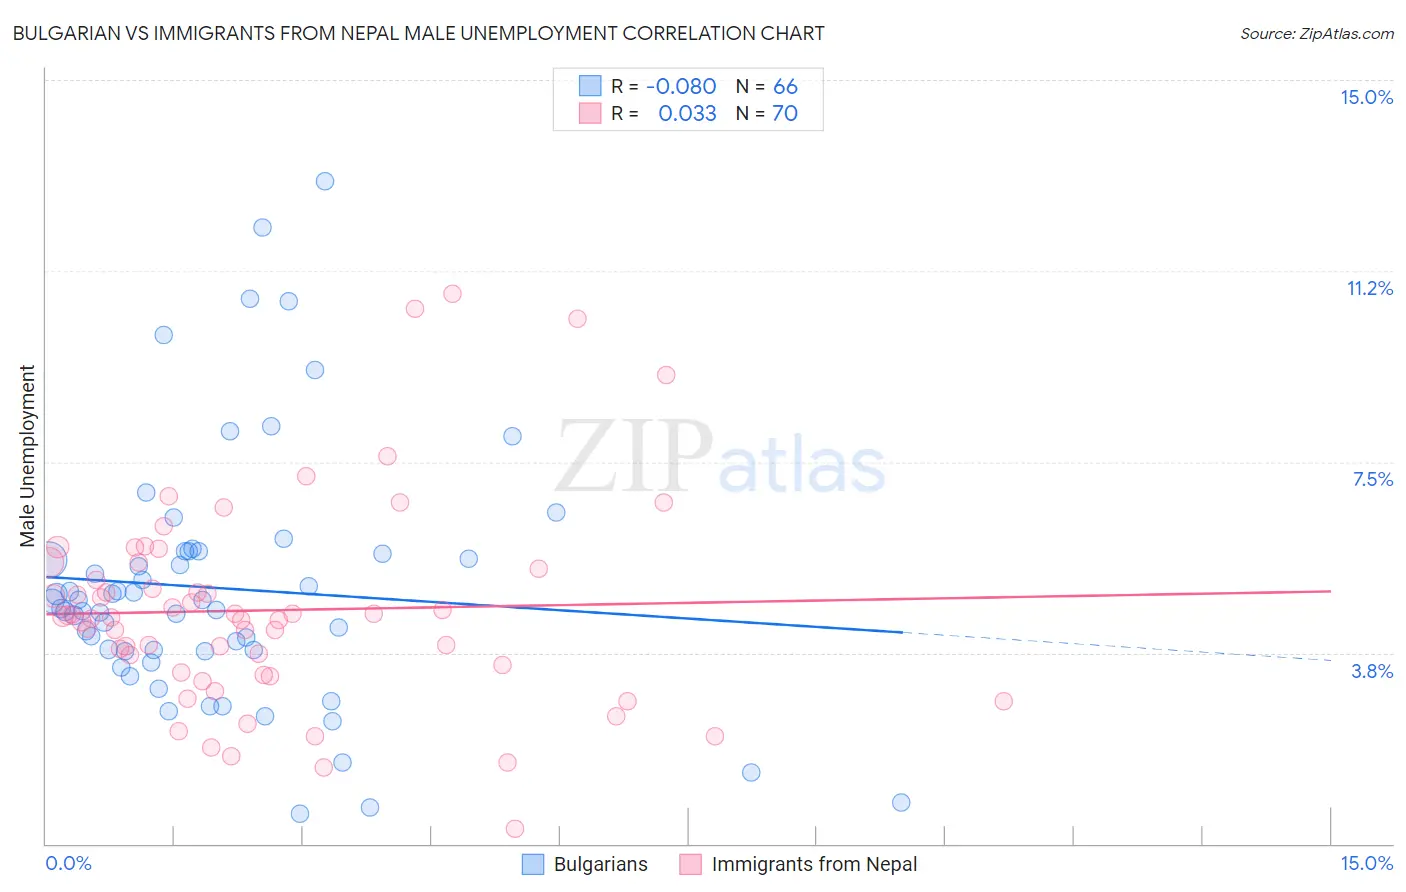 Bulgarian vs Immigrants from Nepal Male Unemployment